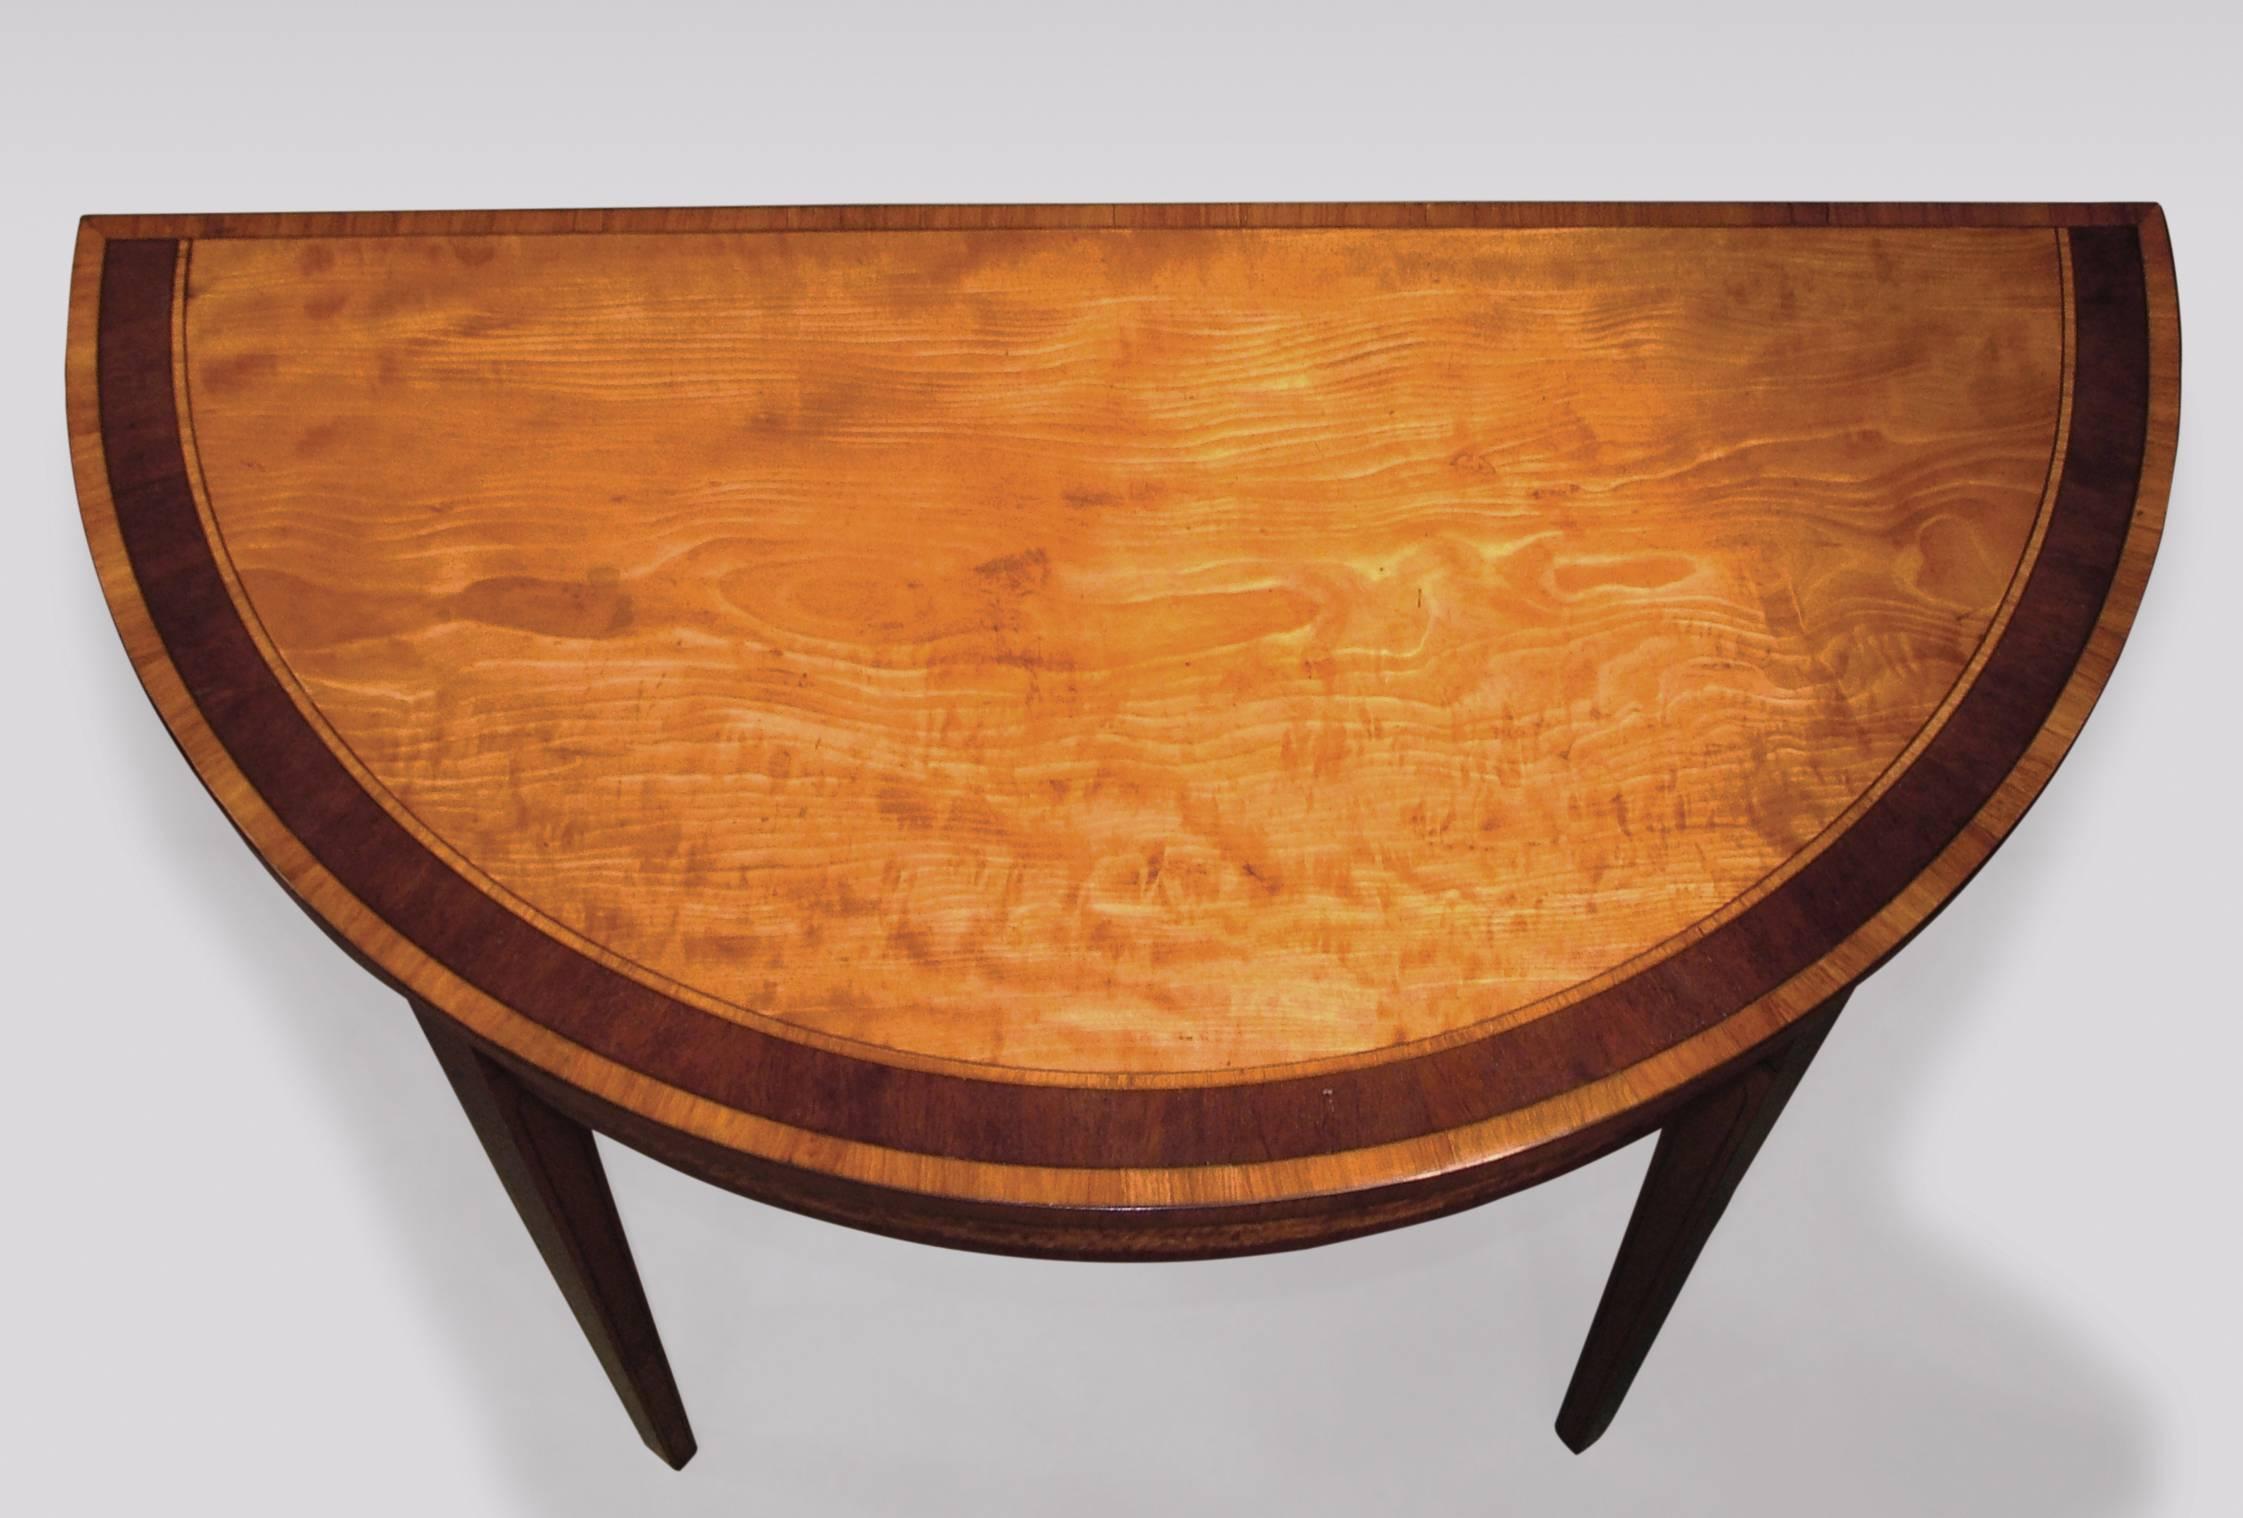 A fine late 18th century Sheraton period figured satinwood half round card table, having tulipwood and purple heart crossbanded top, above ebony line inlaid panel frieze supported on ebony line inlaid square tapering legs.